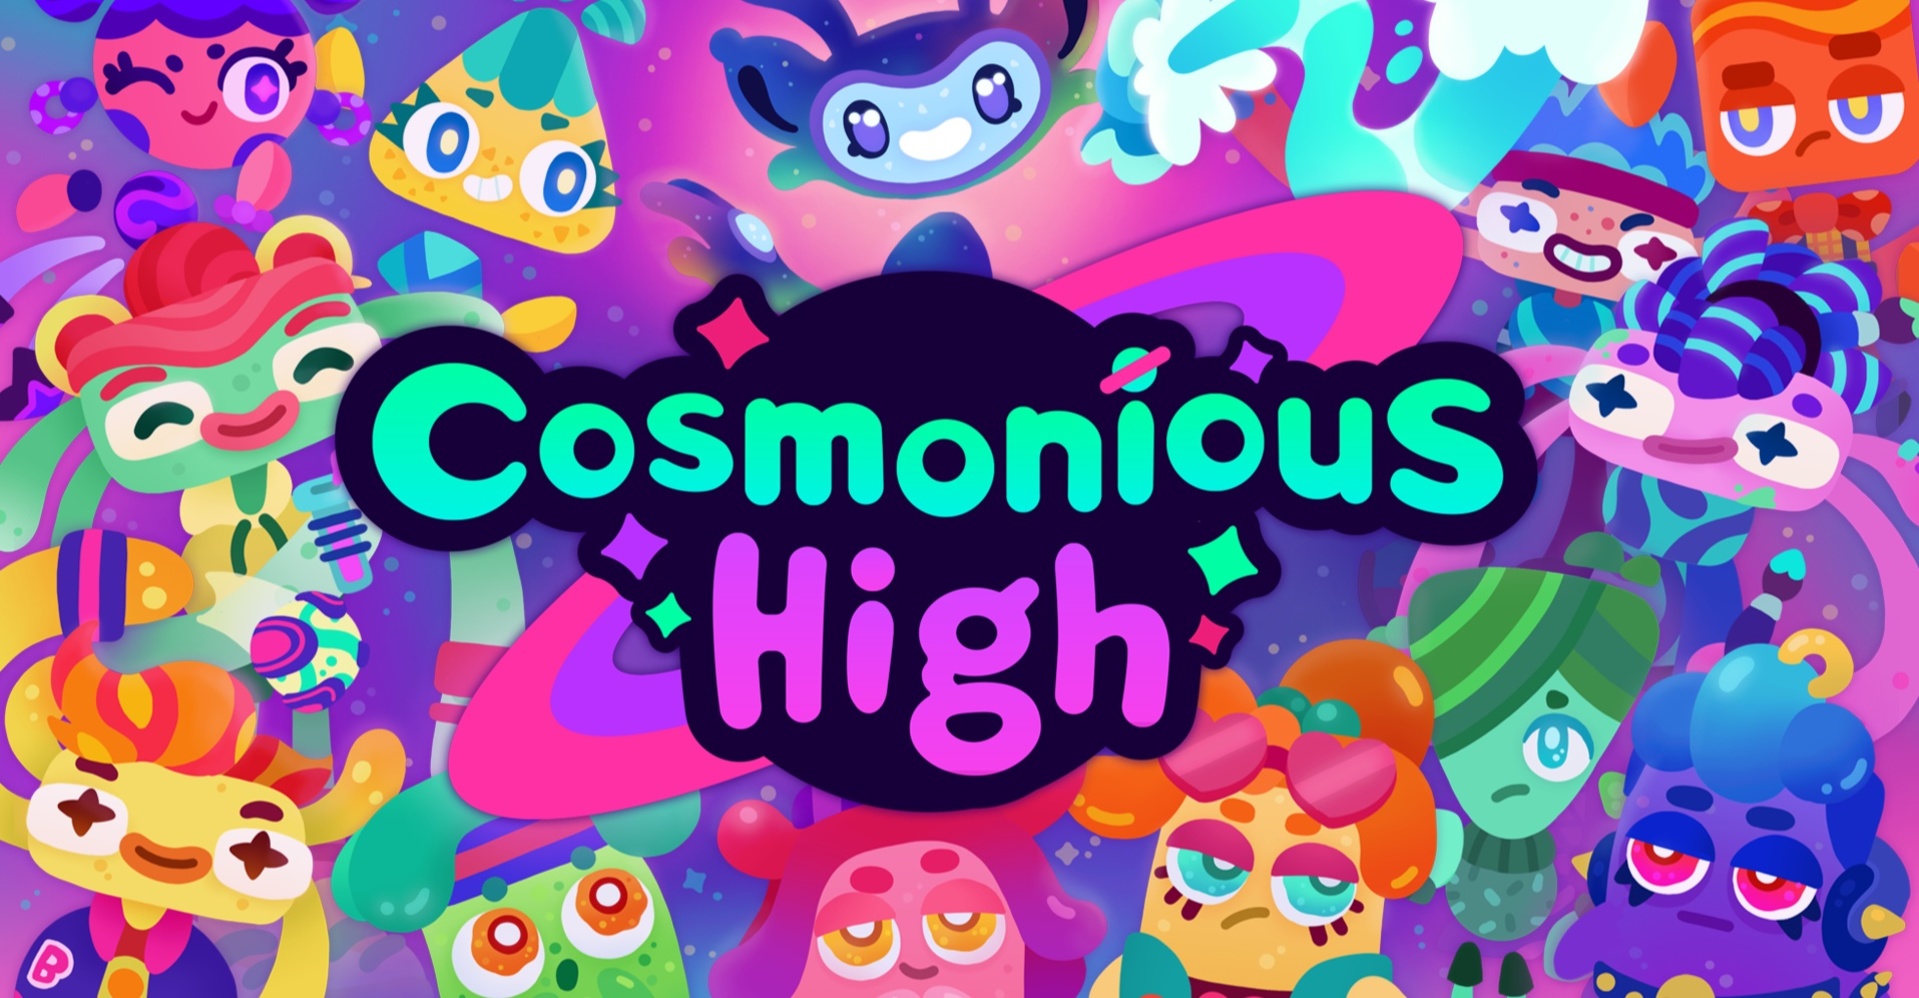 is cosmonious high on ps4